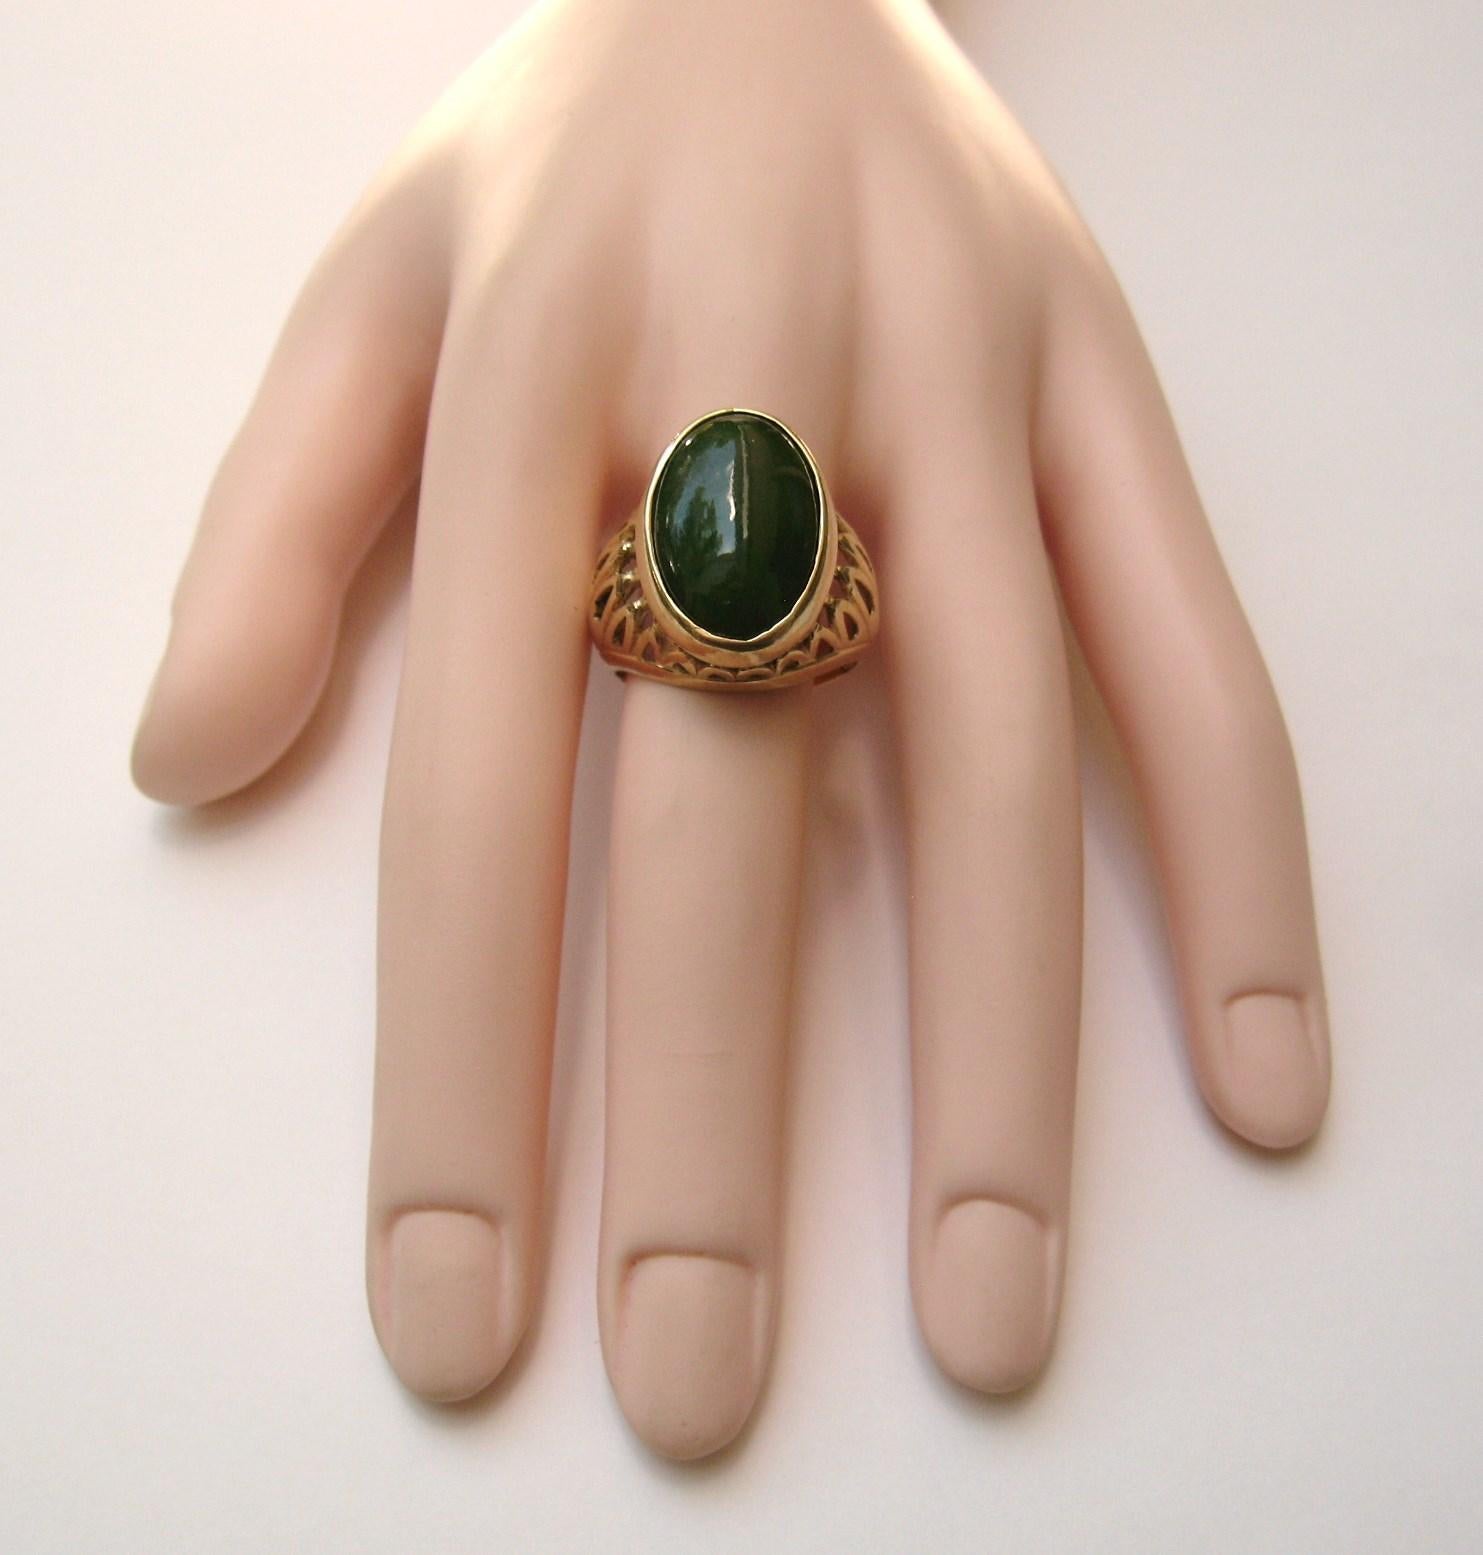  Stunning oval Jade set in a 14 Karat Gold Setting made by Karbra 62, a premier New York City fine jewelry maker, in the 1960s. It sits up high .50